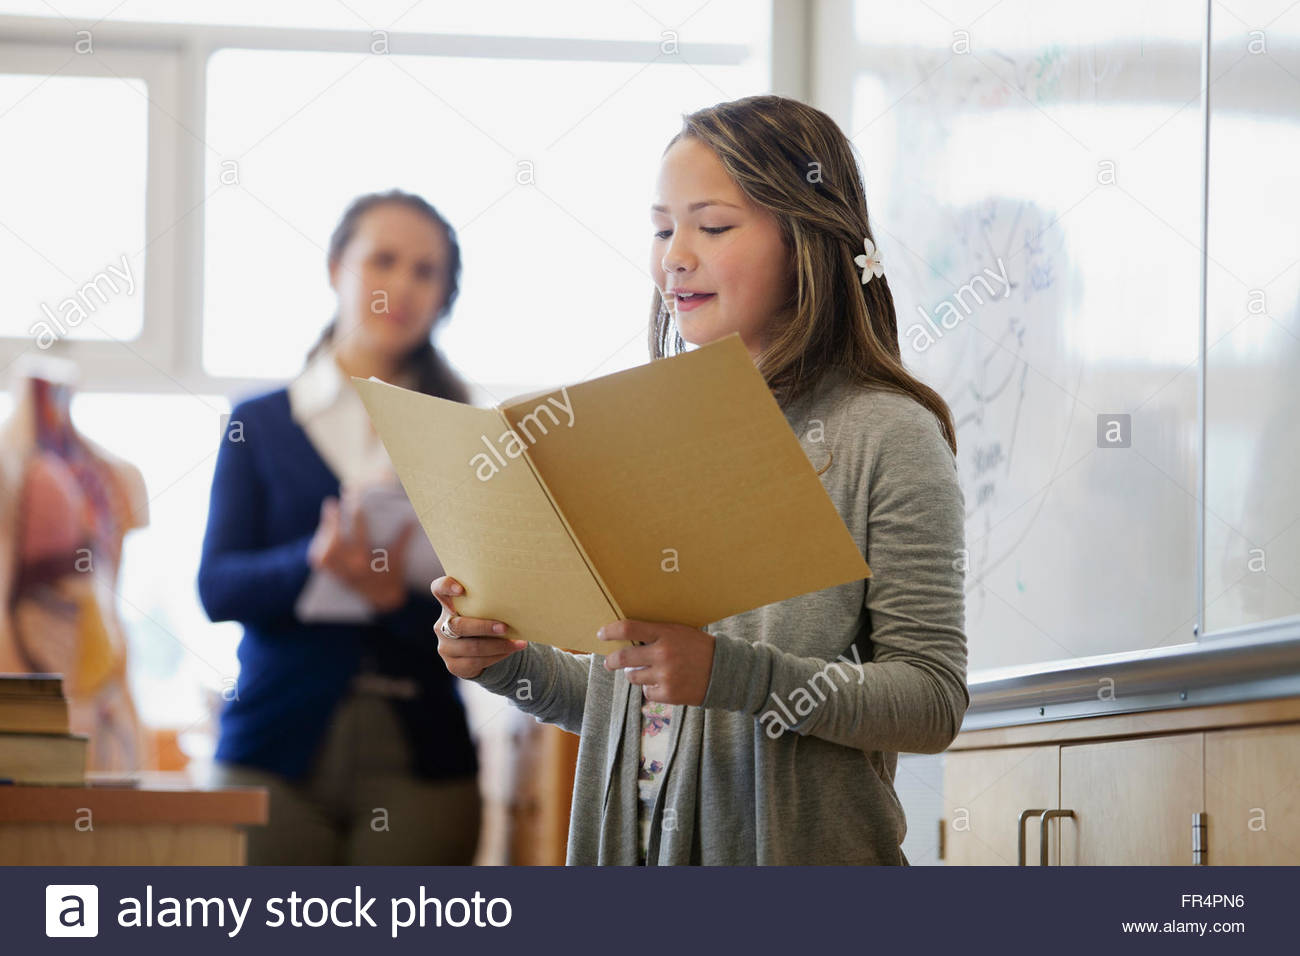 female middle school student giving presentation Stock Photo